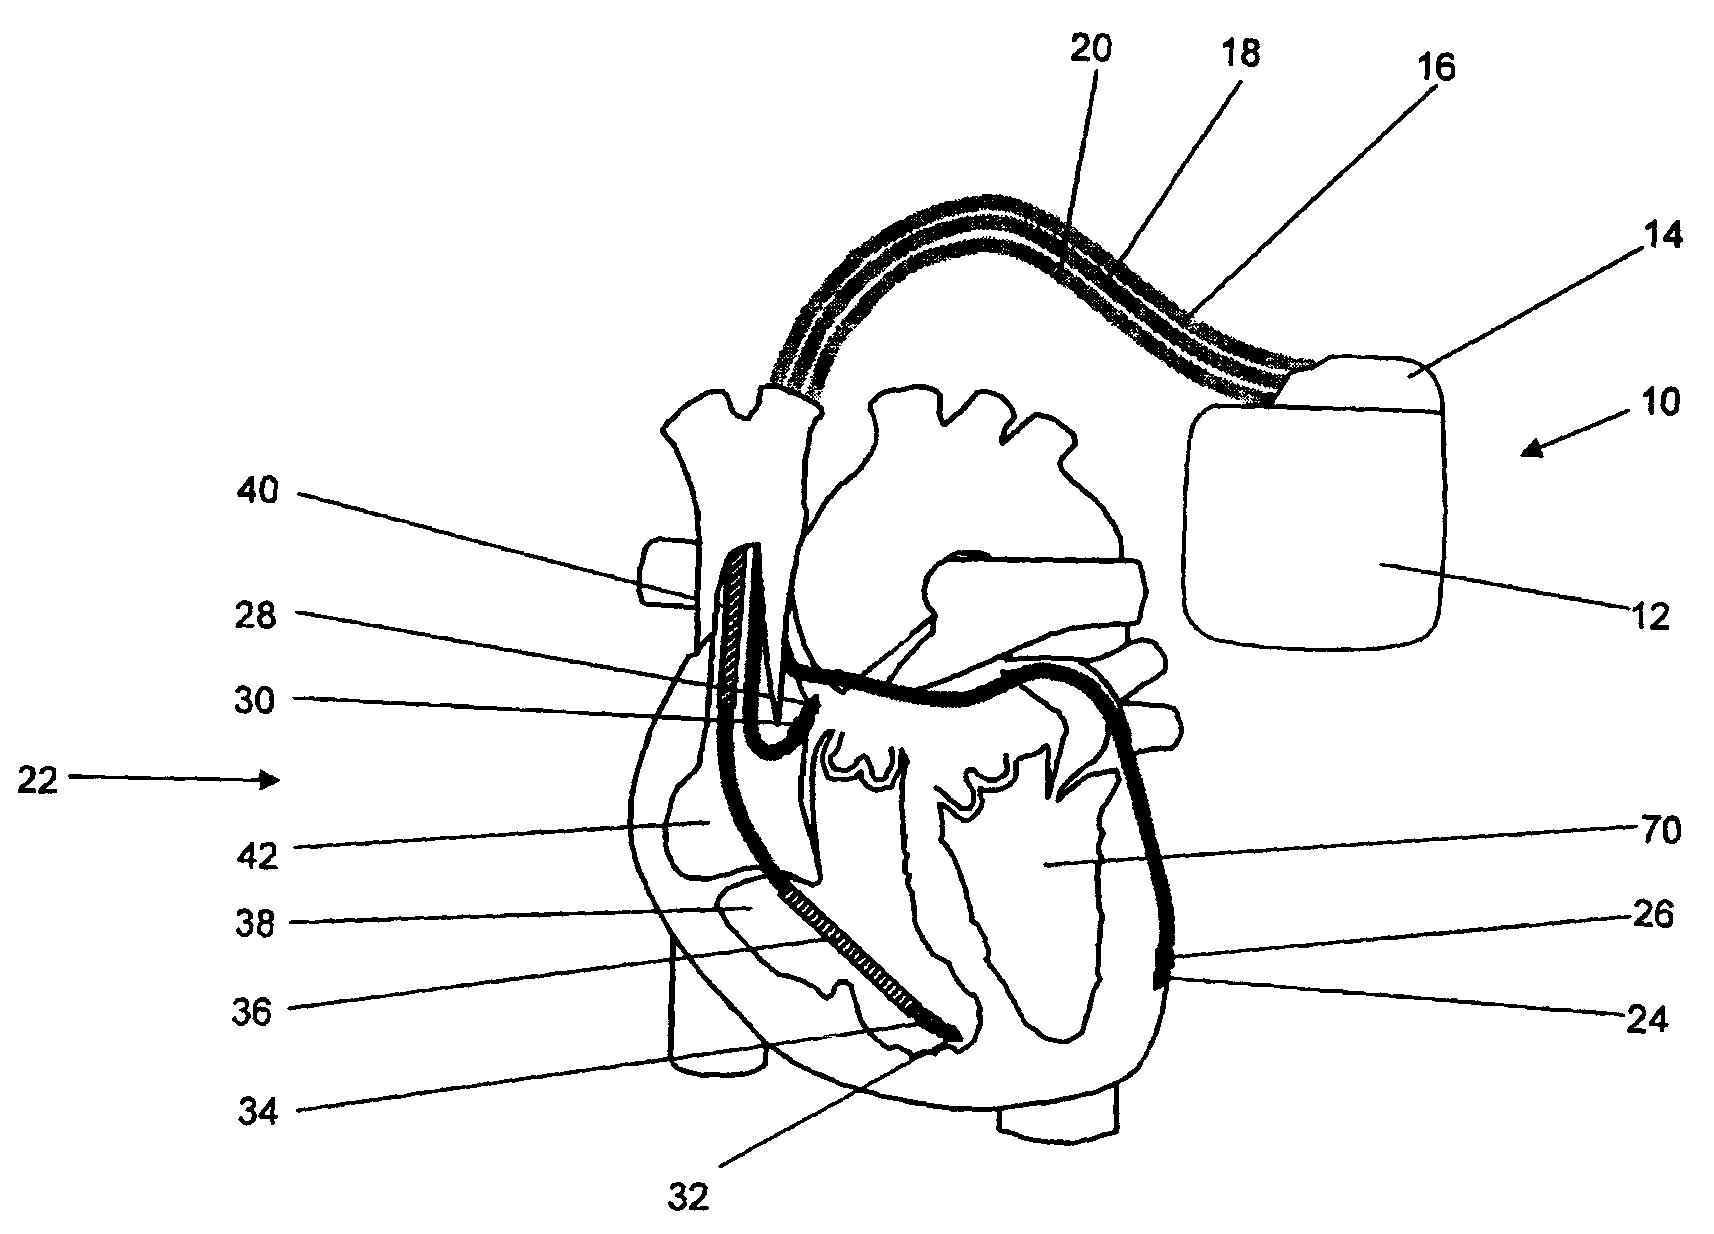 Implantable medical device and method for LV coronary sinus lead implant site optimization